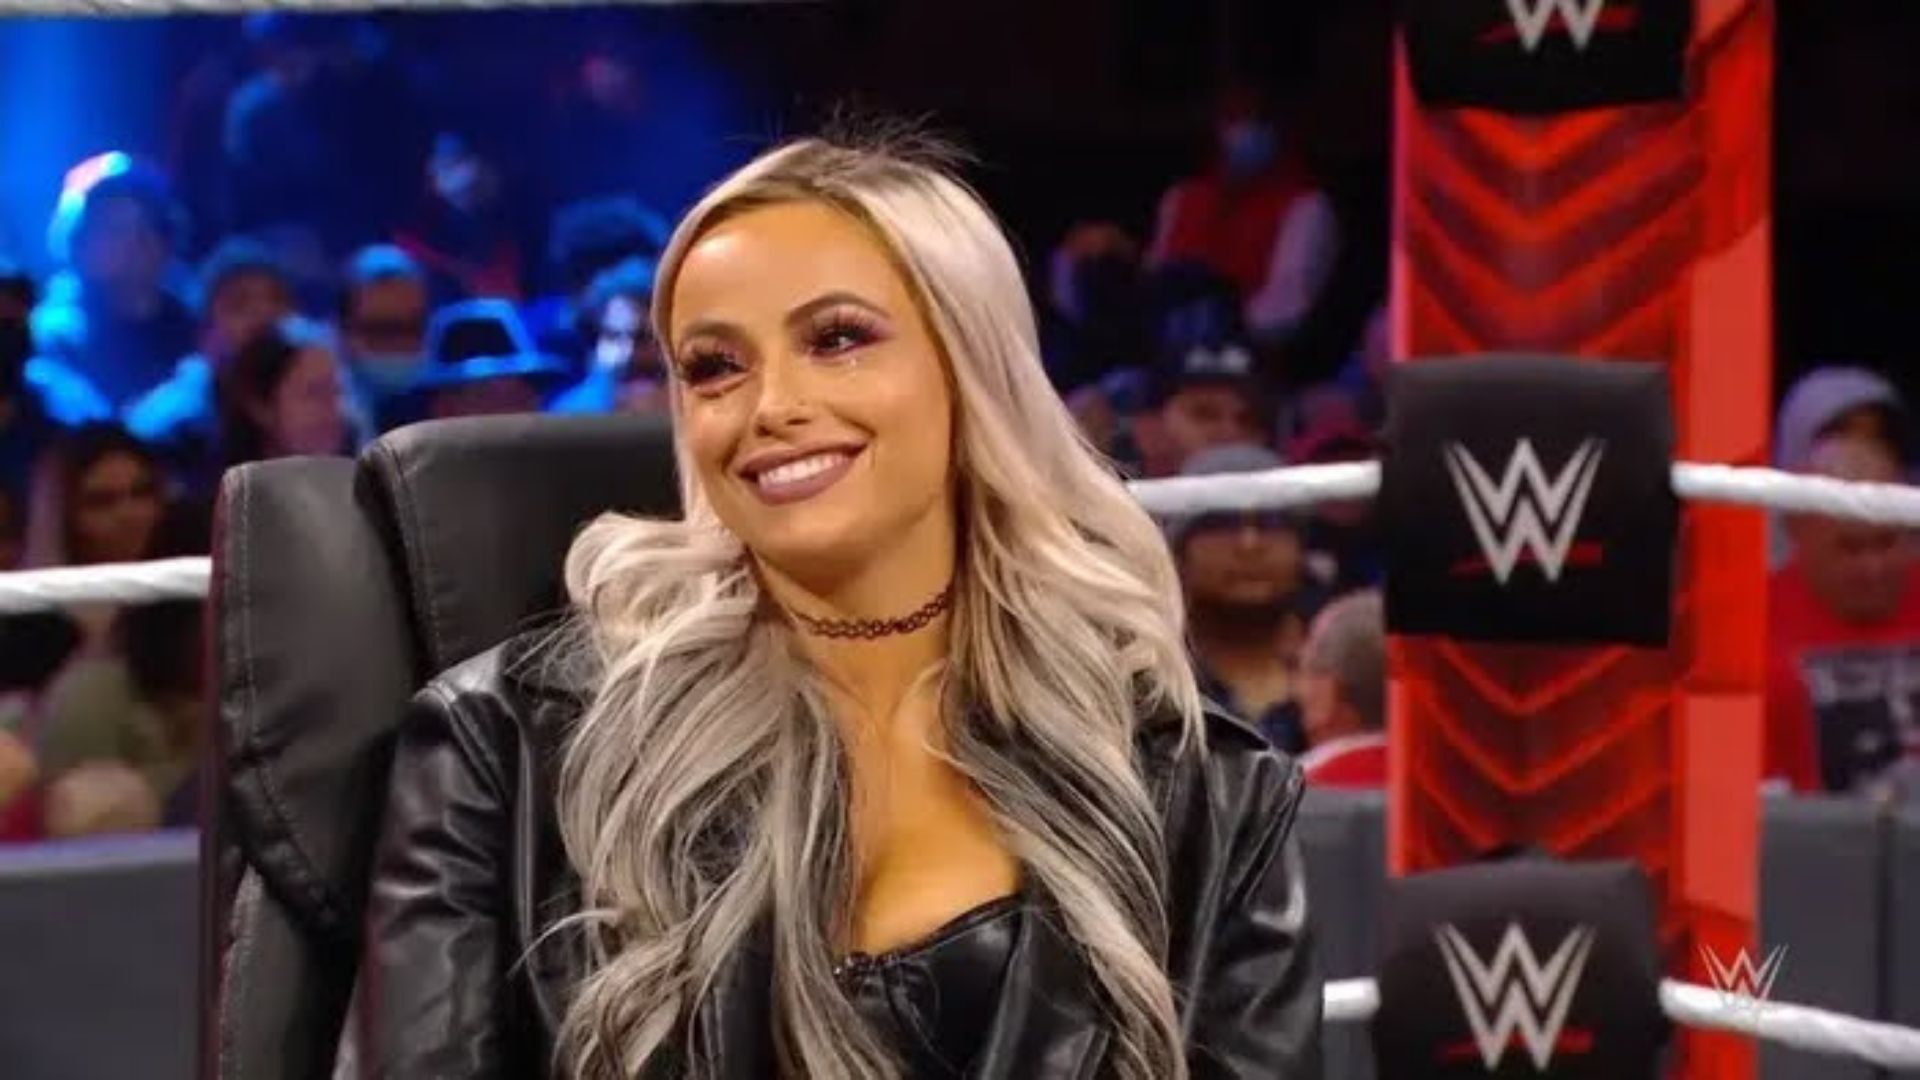 Liv Morgan is currently working in a tag team with Rhea Ripley